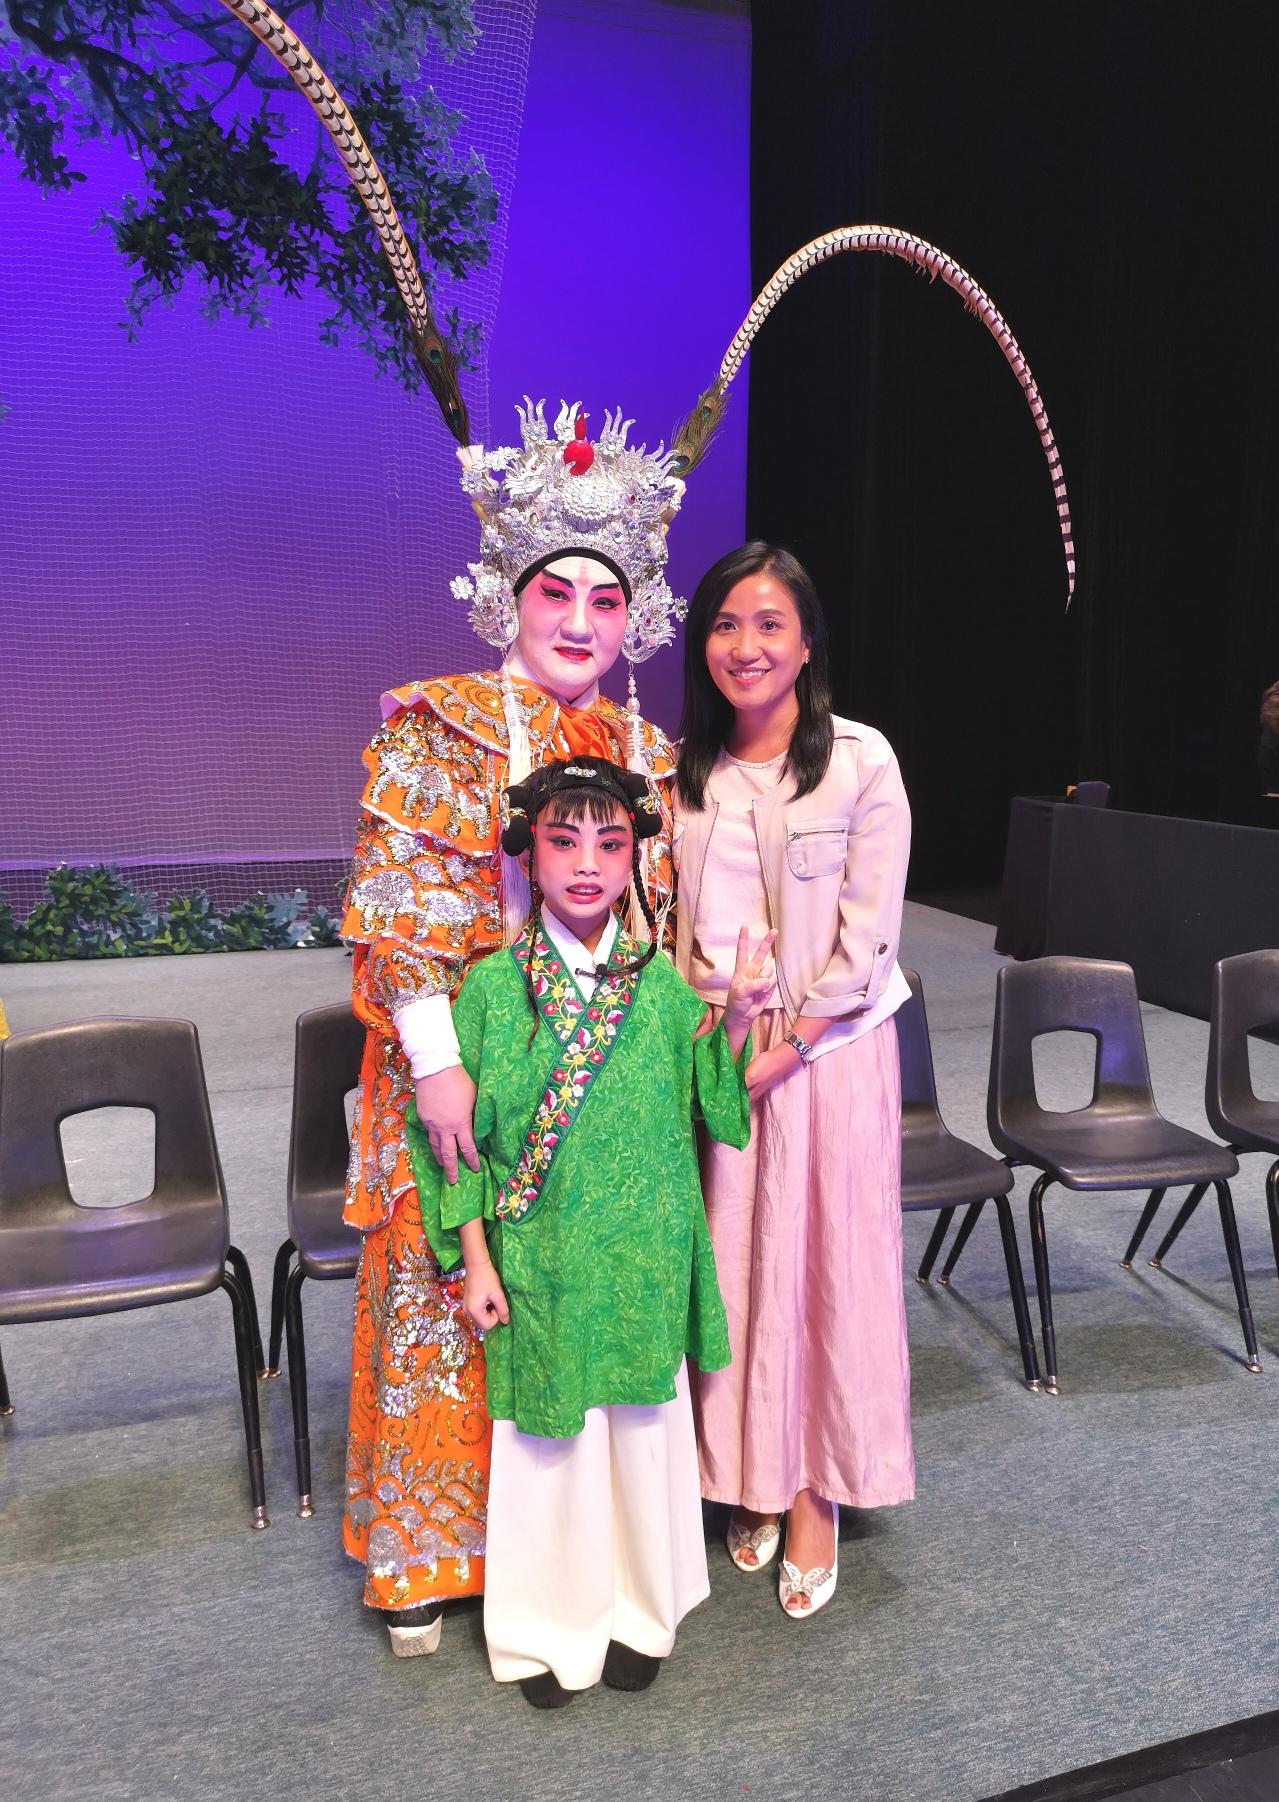 The Director of the Hong Kong Economic and Trade Office (Toronto), Ms Emily Mo (right), is pictured with the Director of Starlight Chinese Opera Performing Arts Centre, Ms Alice Chan (left), and a Cantonese opera starlet (centre) after the Cantonese opera performance at Flato Markham Theatre, Markham, Canada, on July 24 (Toronto time).